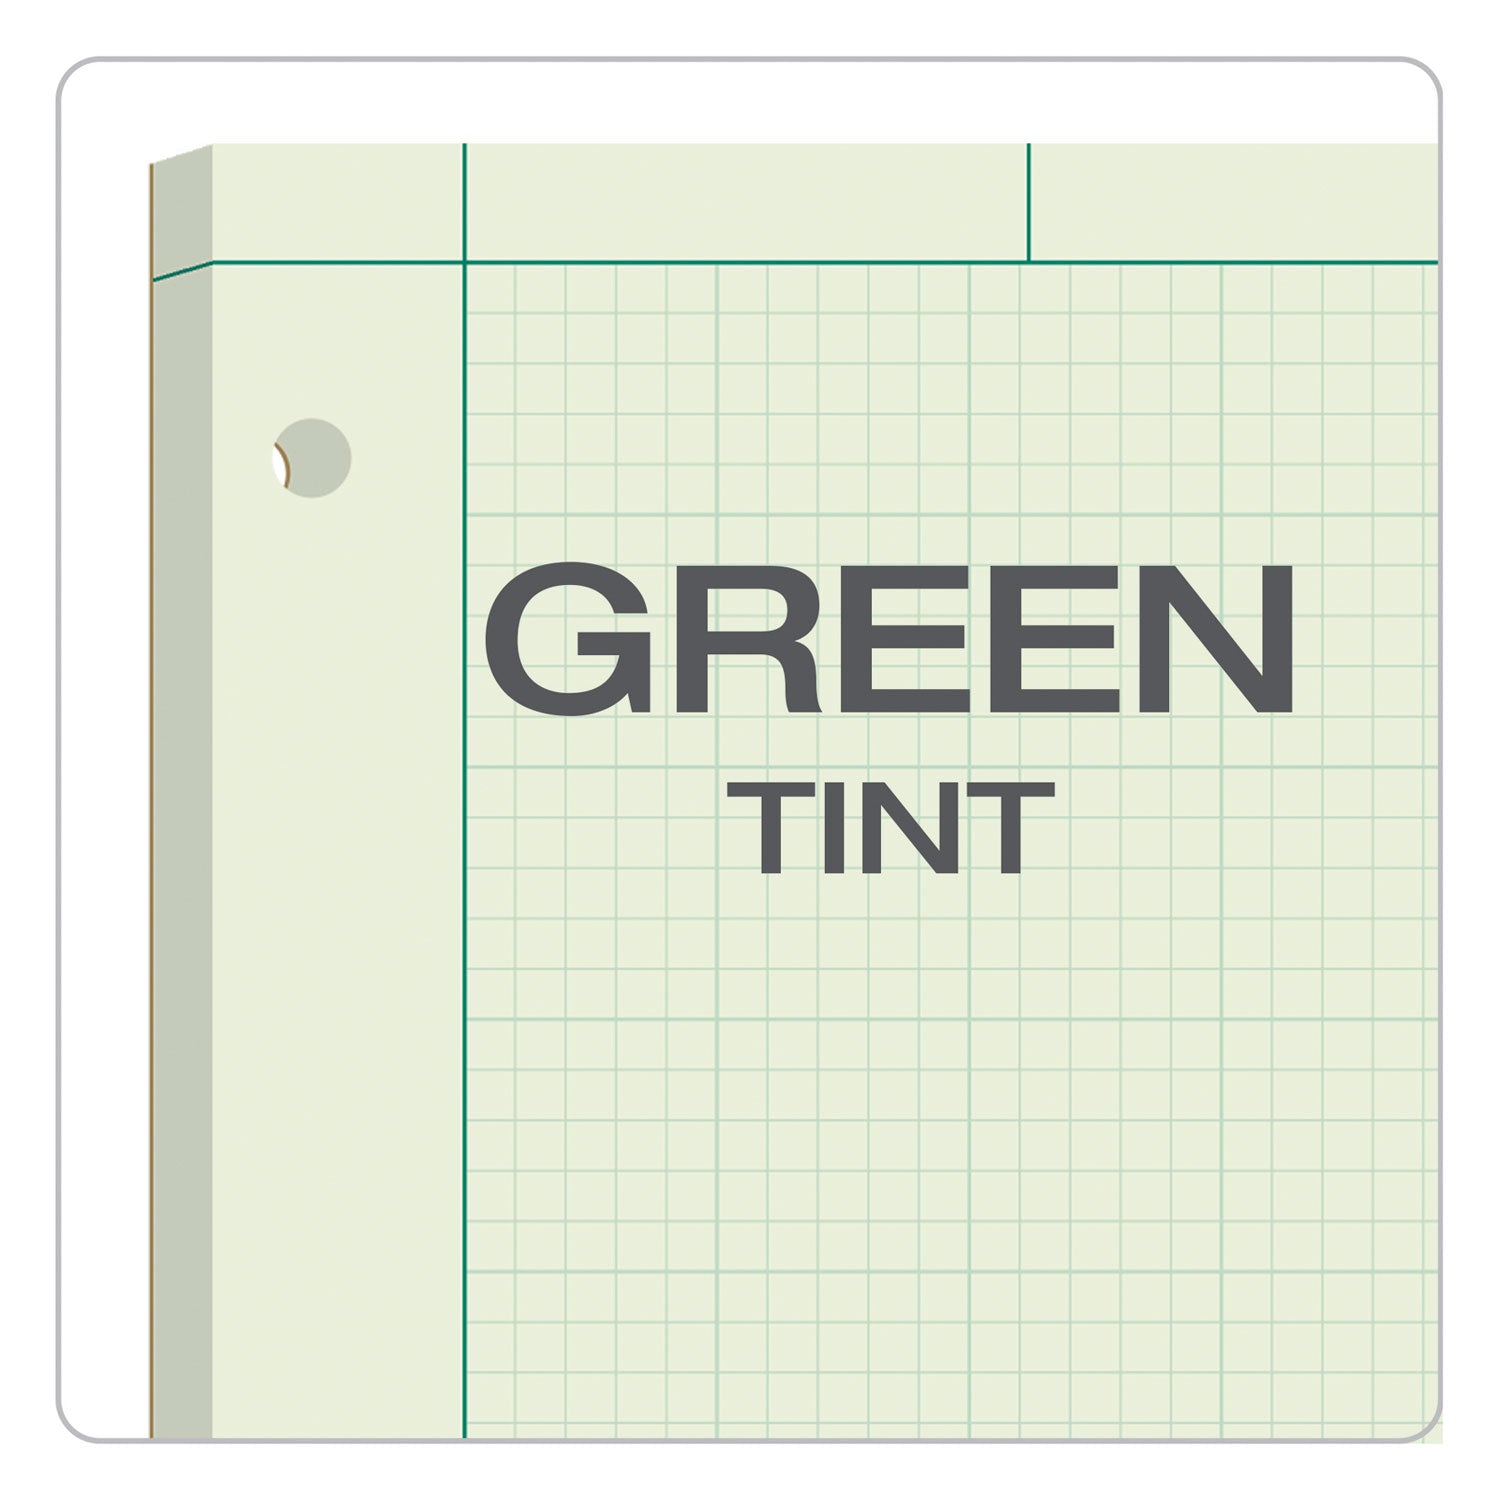 Engineering Computation Pads, Cross-Section Quadrille Rule (5 sq/in, 1 sq/in), Green Cover, 200 Green-Tint 8.5 x 11 Sheets - 